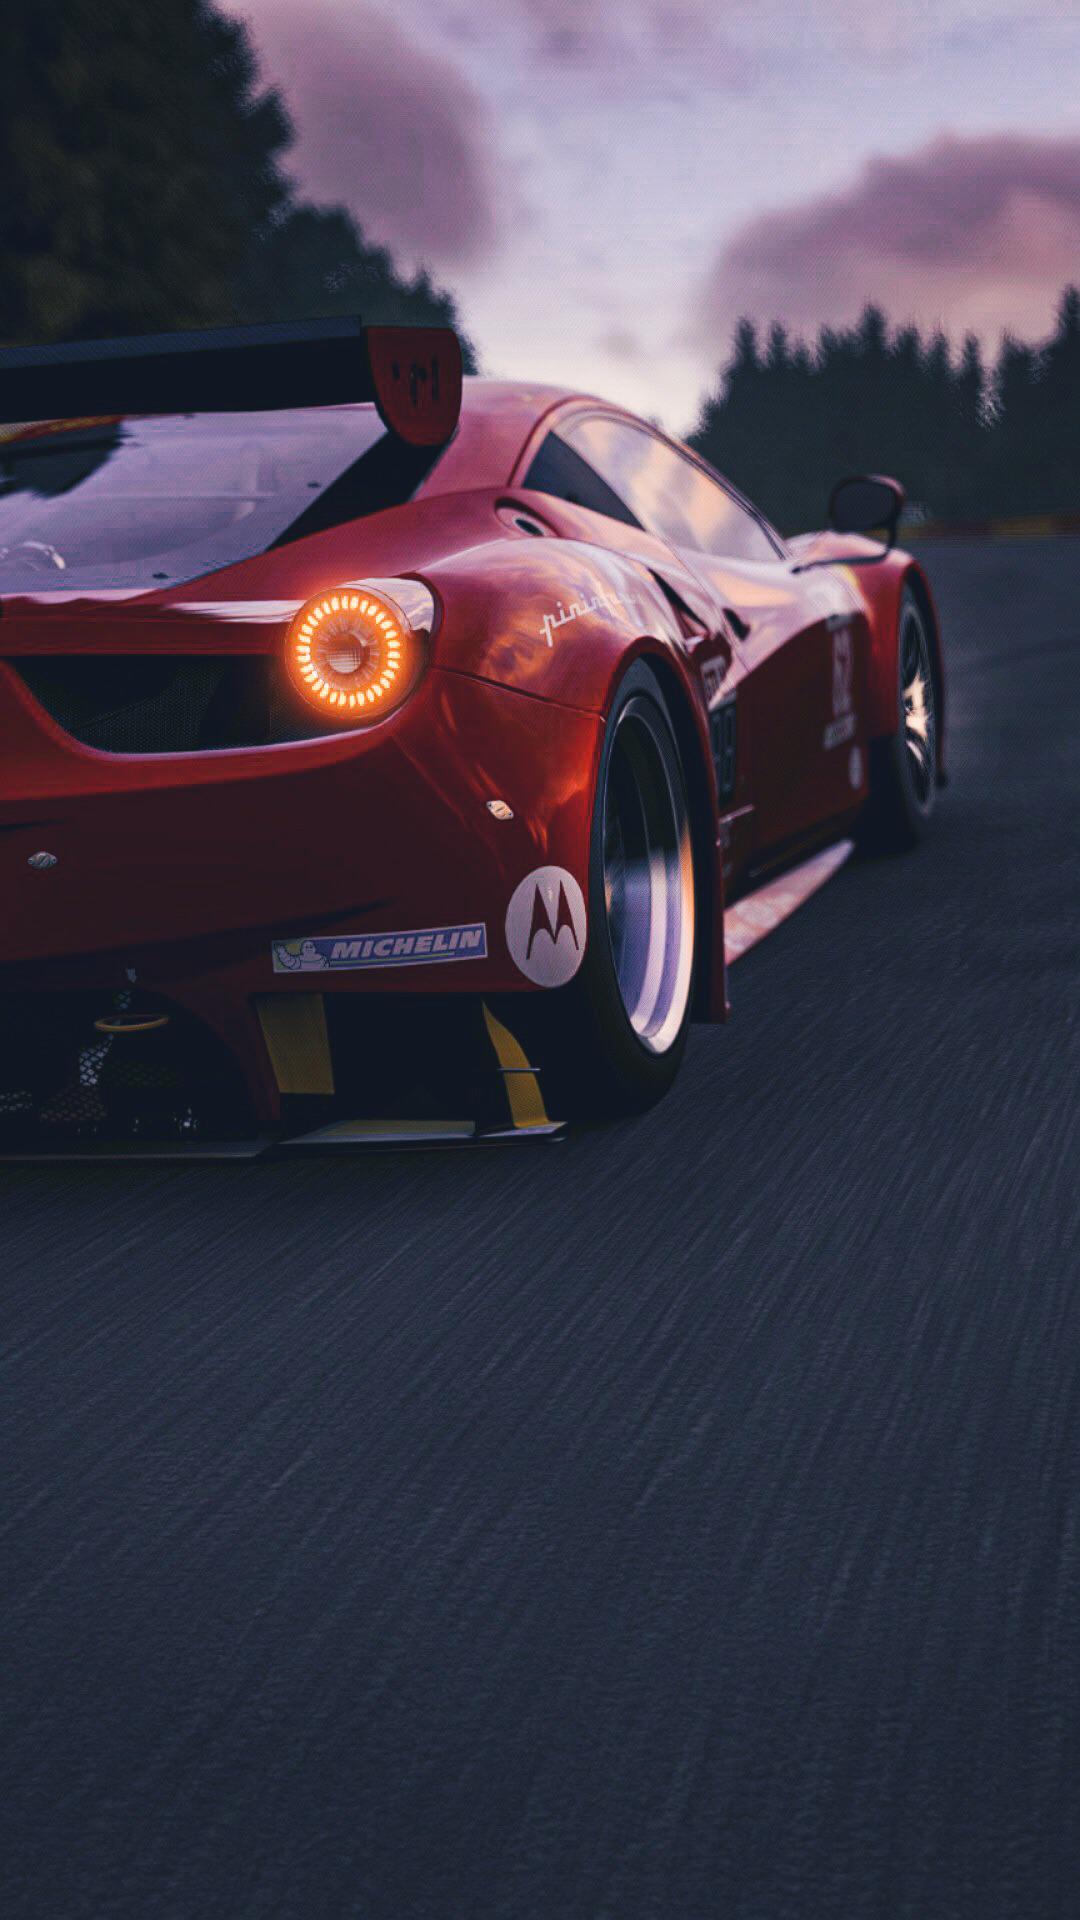 Download These Ferrari iPhone Wallpaper from Forza Now and Thank